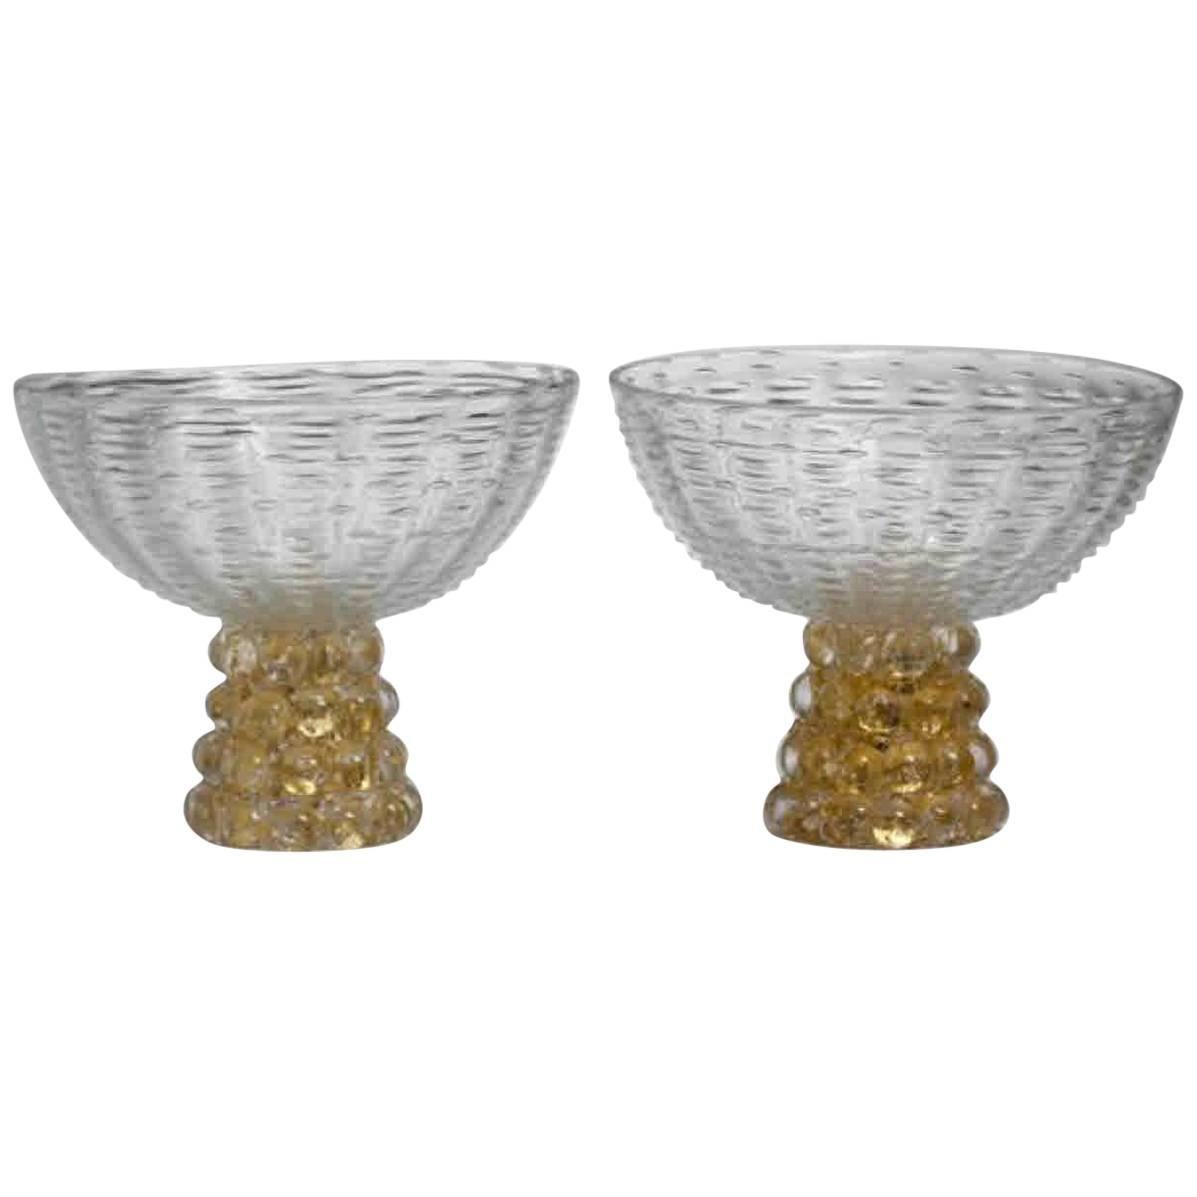 Barovier Murano Pair of Art Deco Pedestal Bowls with Lenti Bases For Sale